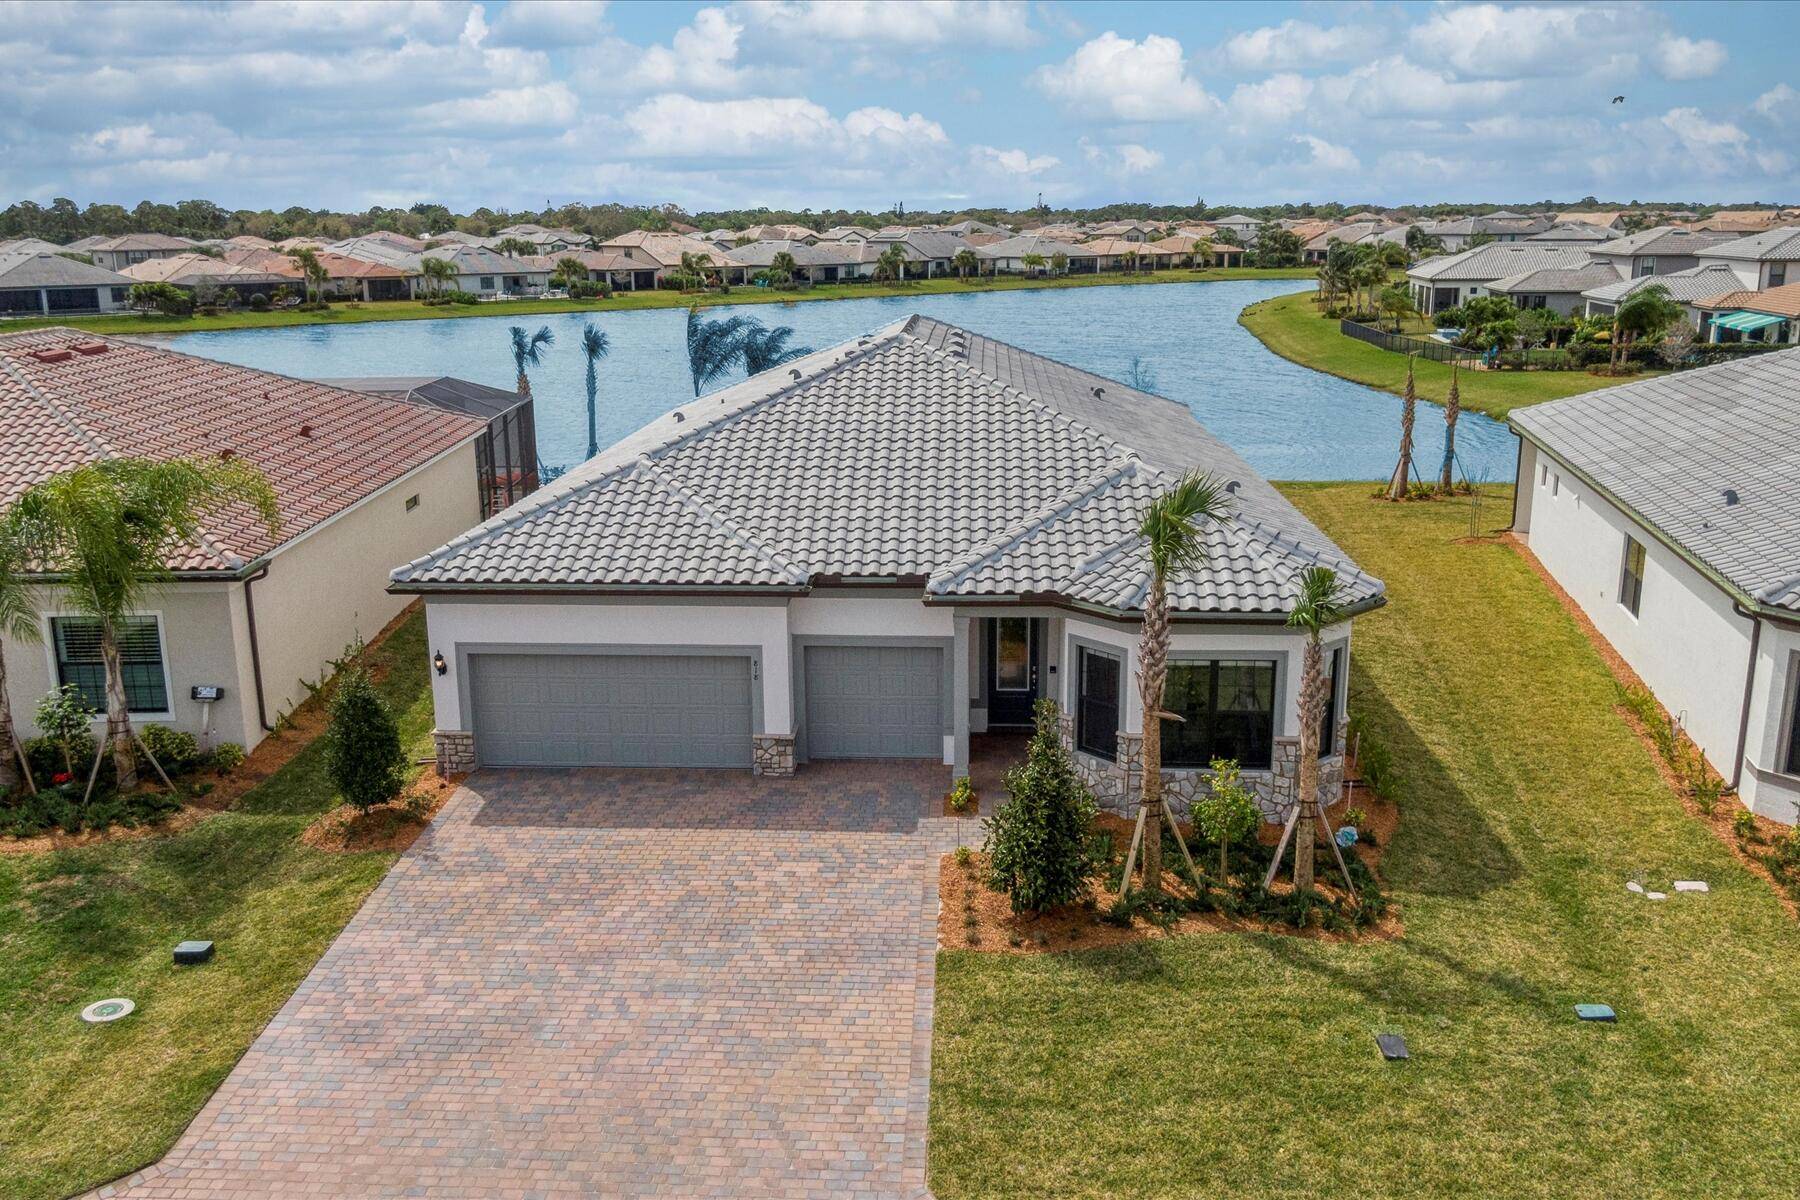 Welcome to a Florida dream in the new master planned community of Veranda Gardens only 15 minutes from downtown Stuart and the water !